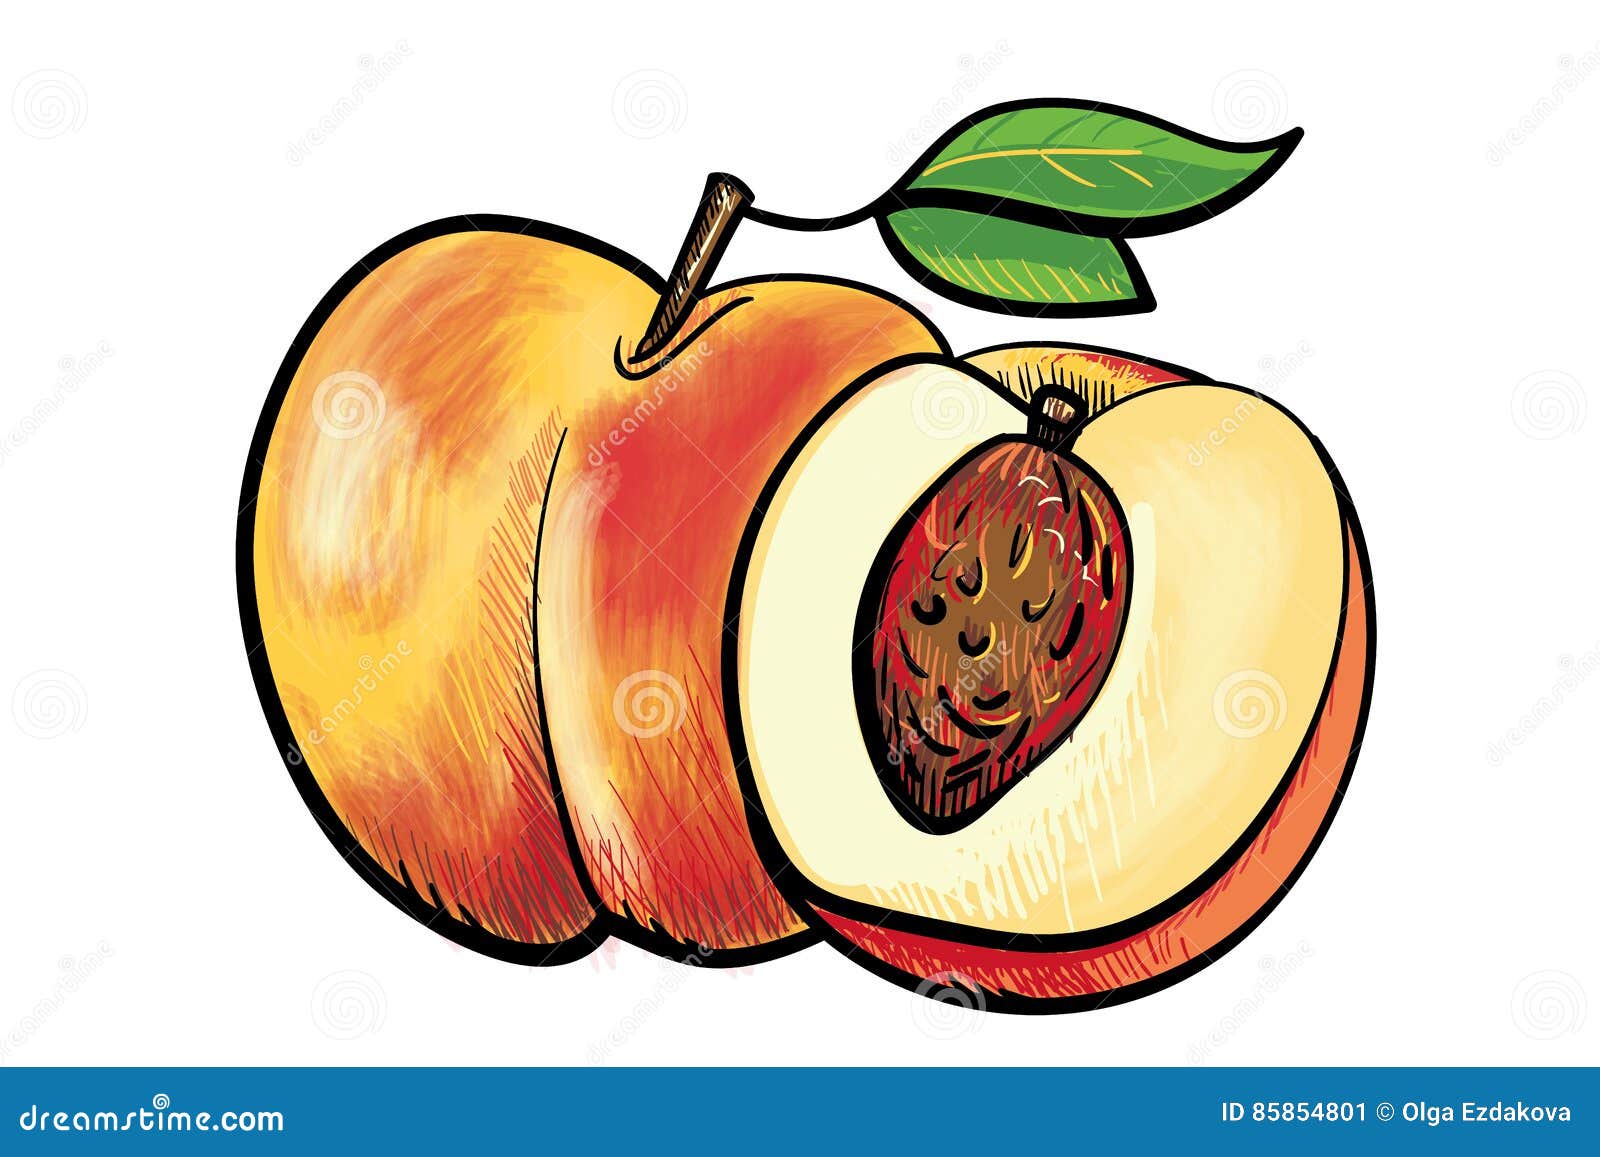 Two handdrawn peaches stock vector. Illustration of ripe - 85854801